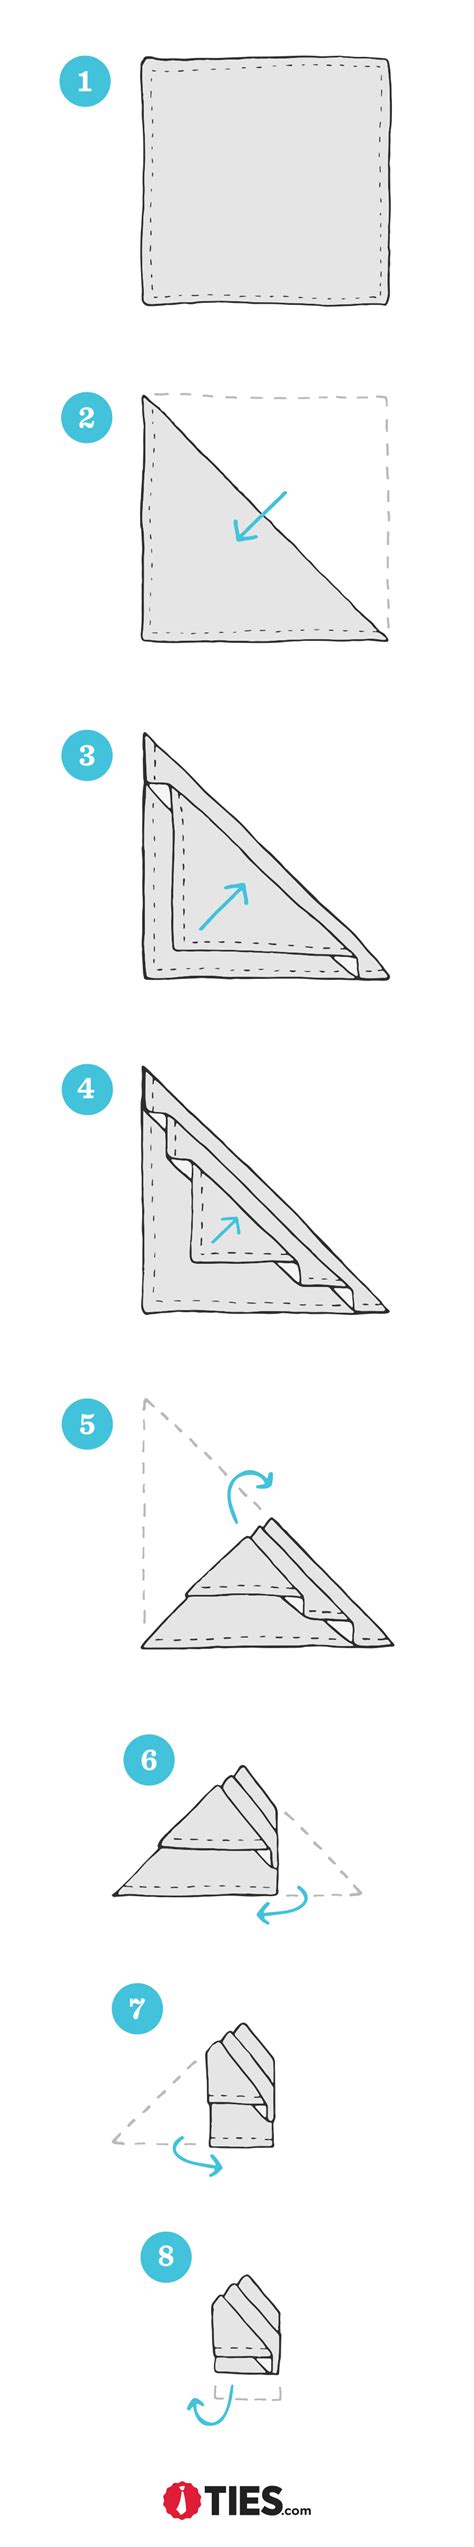 How To Fold The Stairs Pocket Square